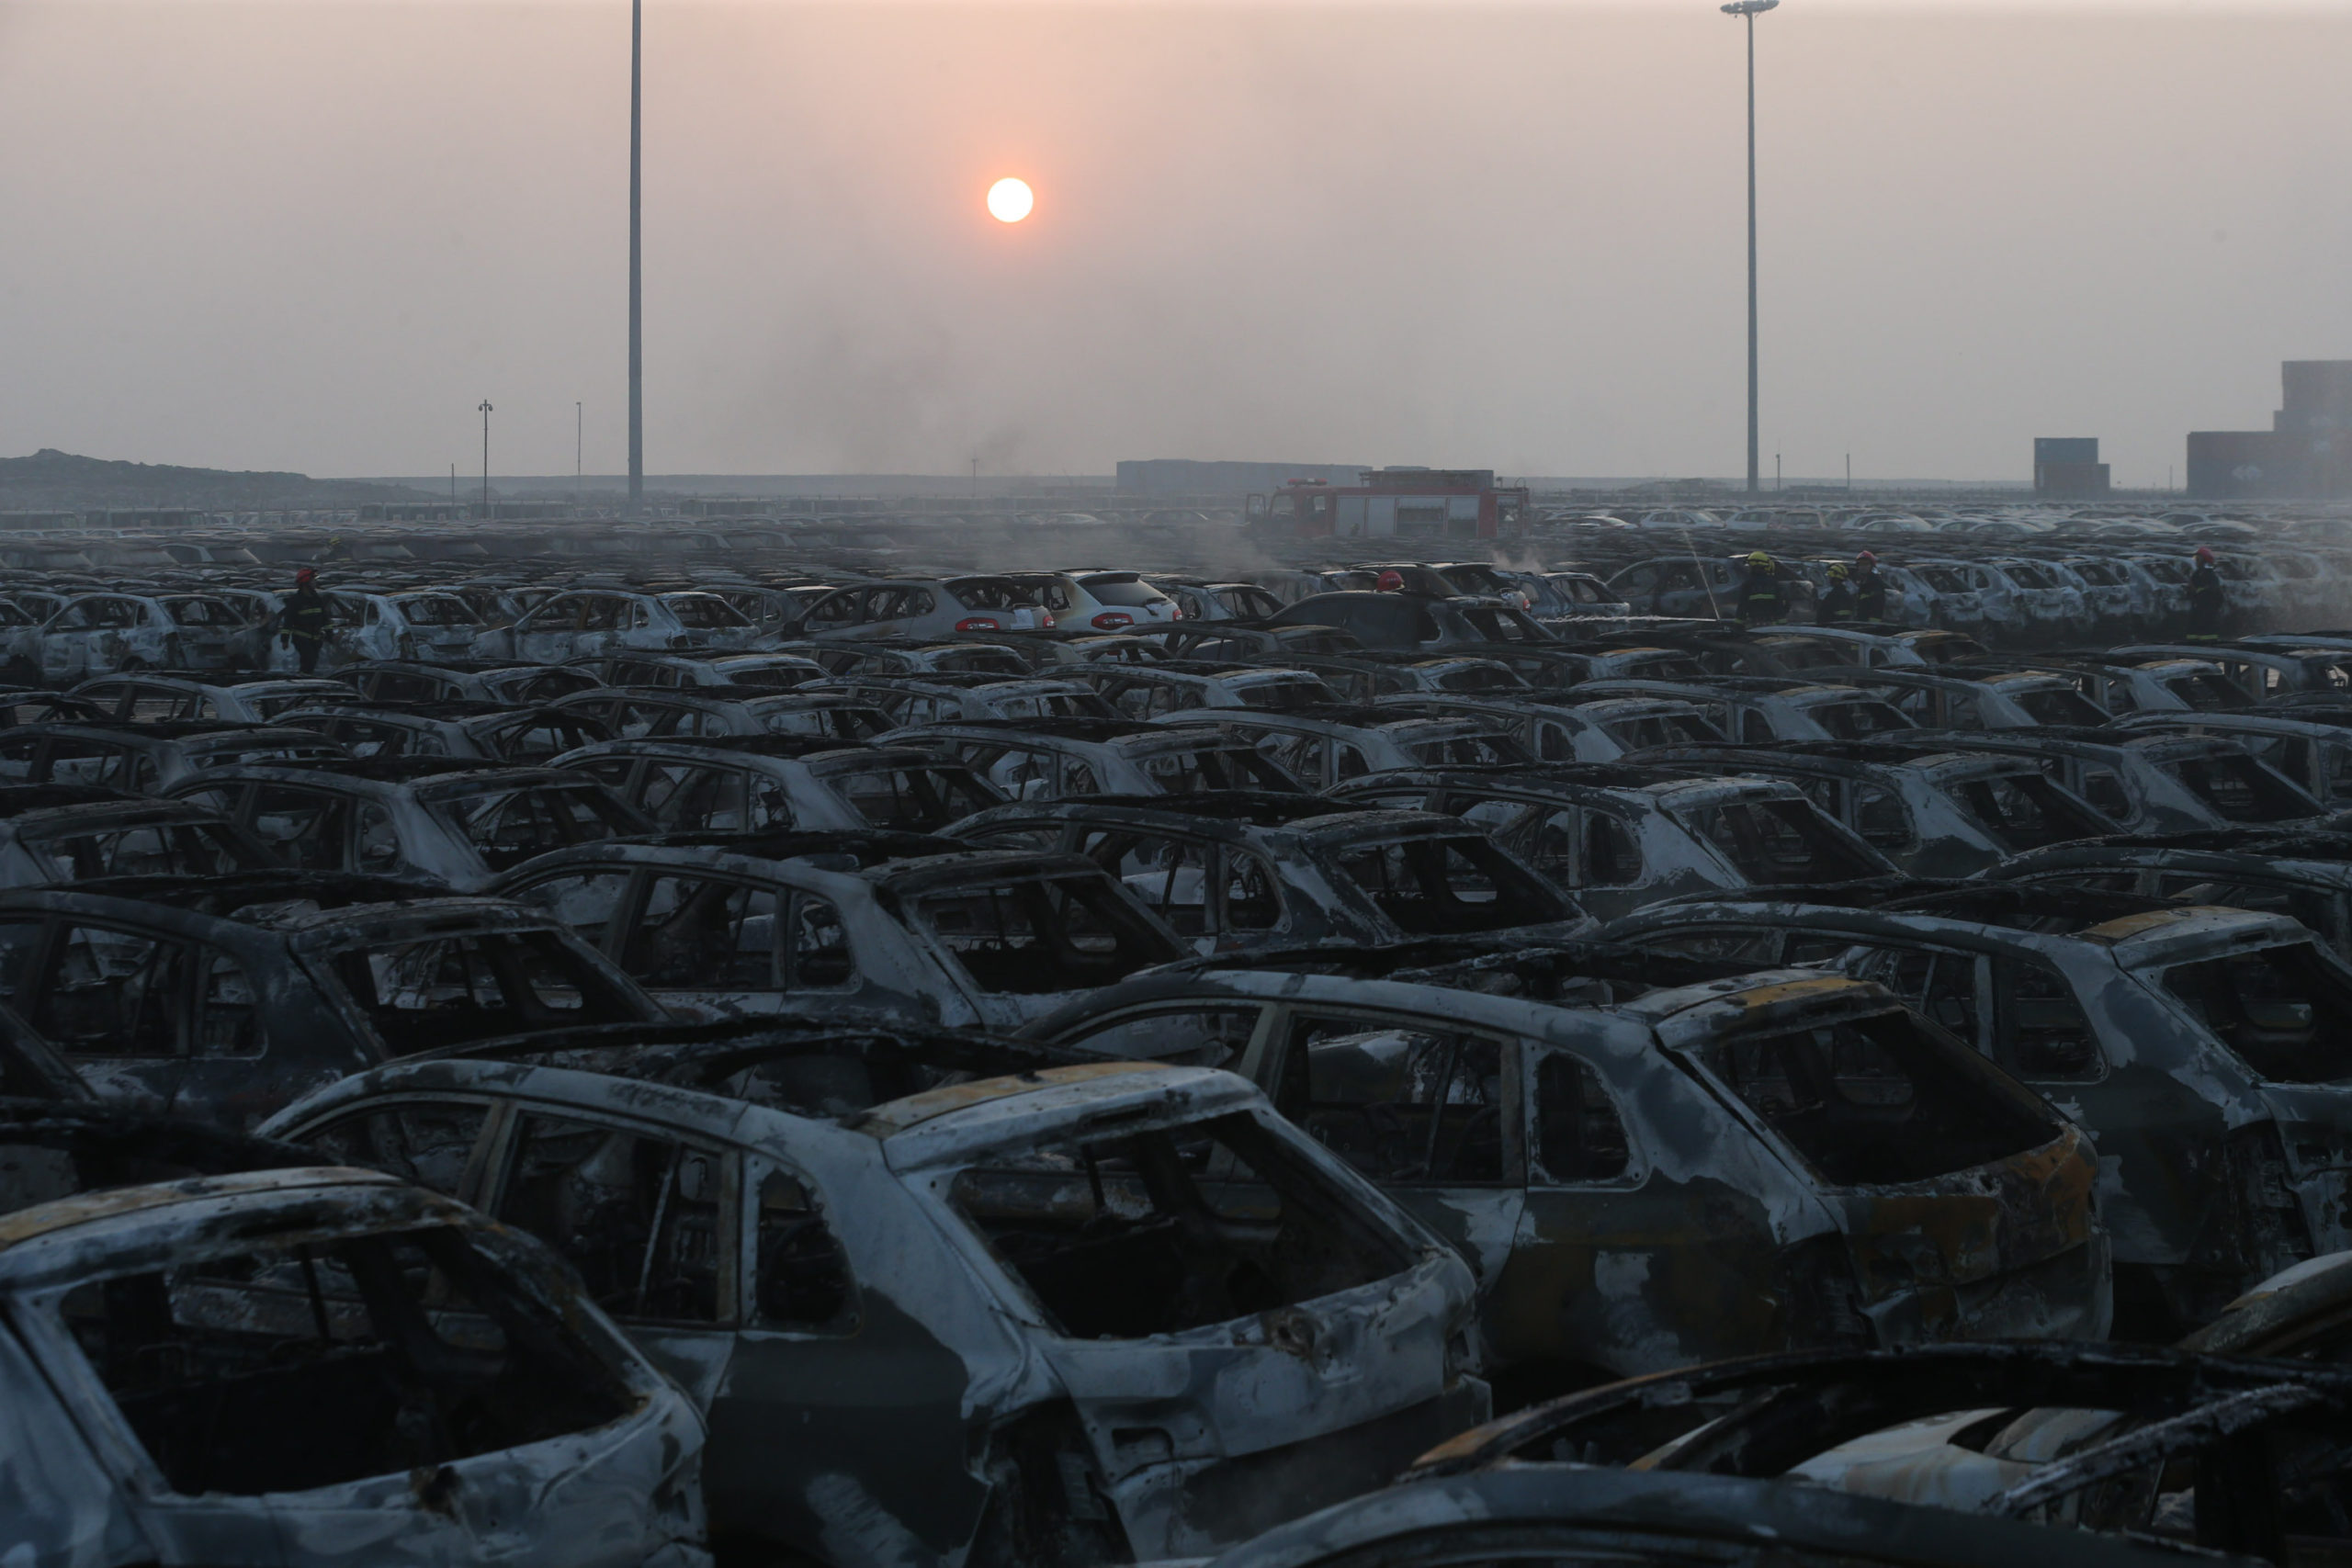 Photos From The Aftermath Of The Devastating Tianjin Explosion